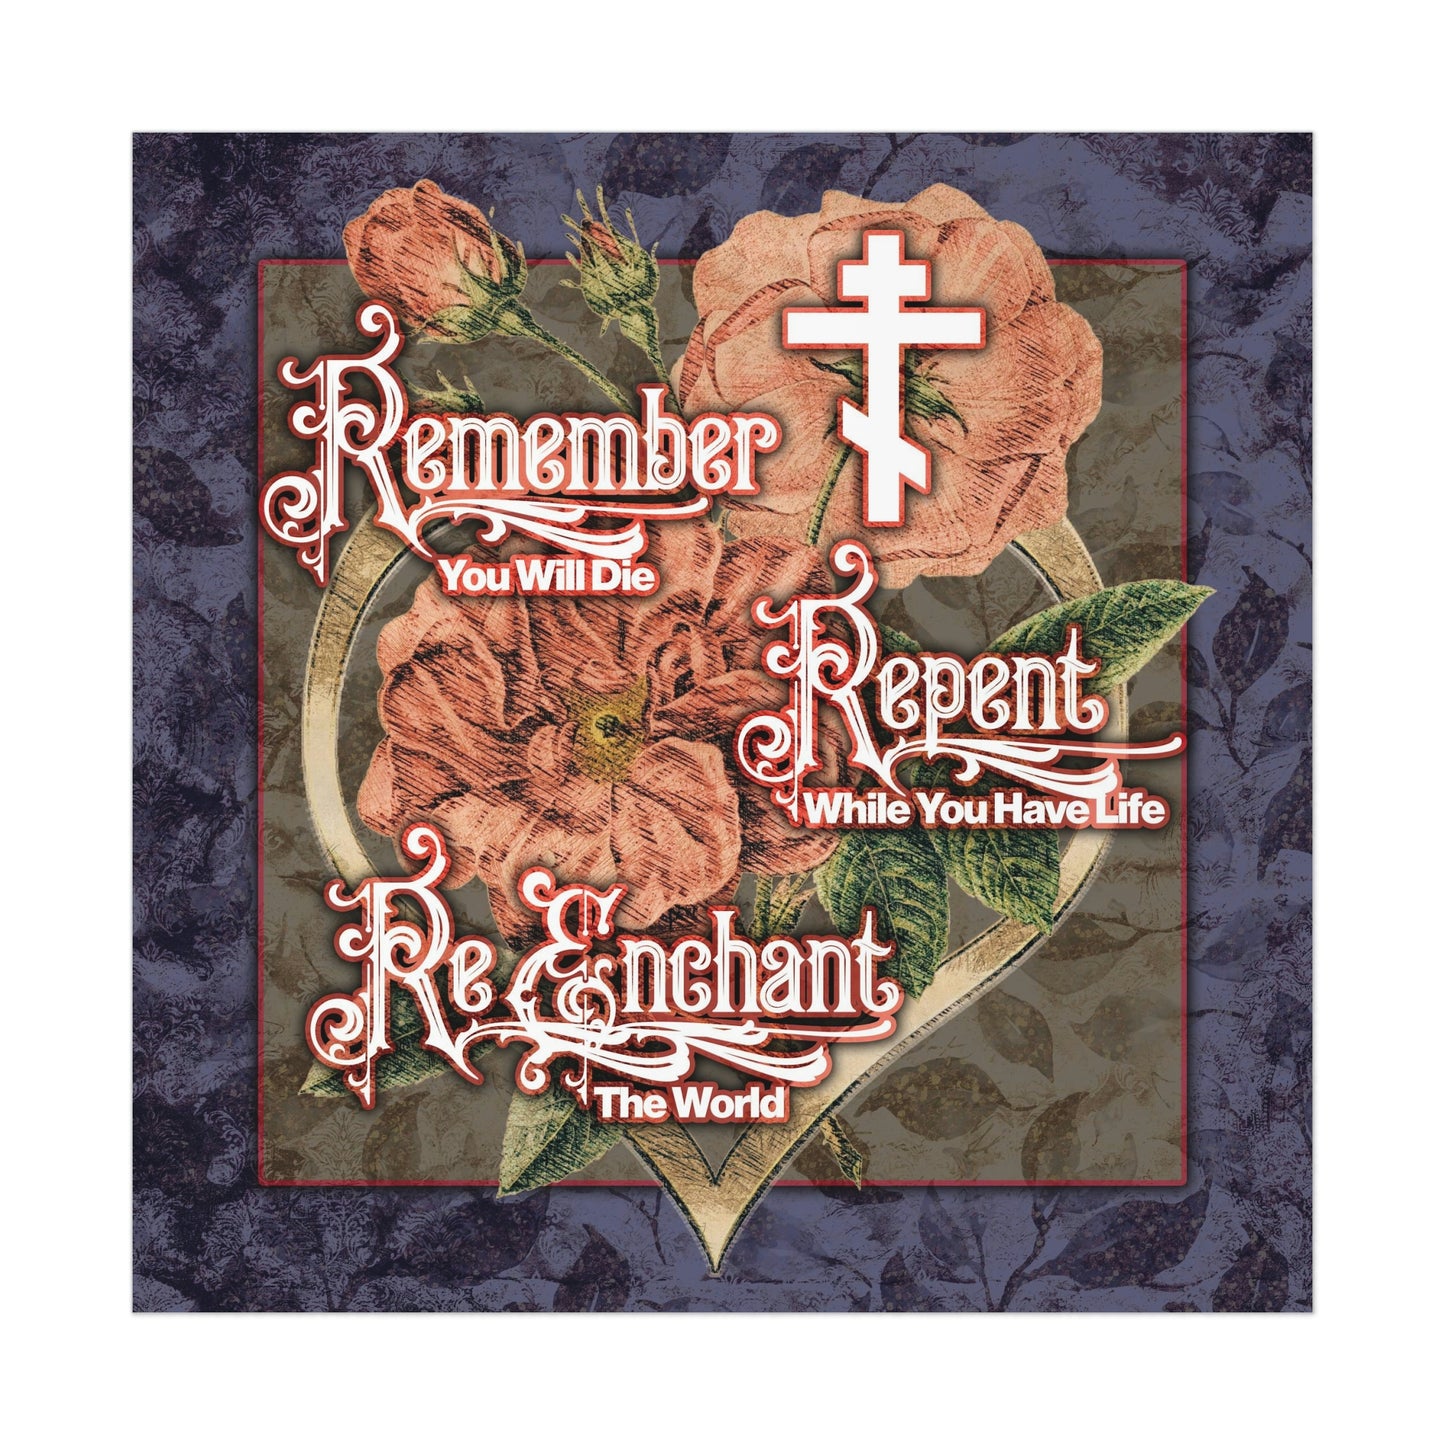 Remember Repent Re-Enchant: Victorian Design No.1 | Orthodox Christian Art Poster